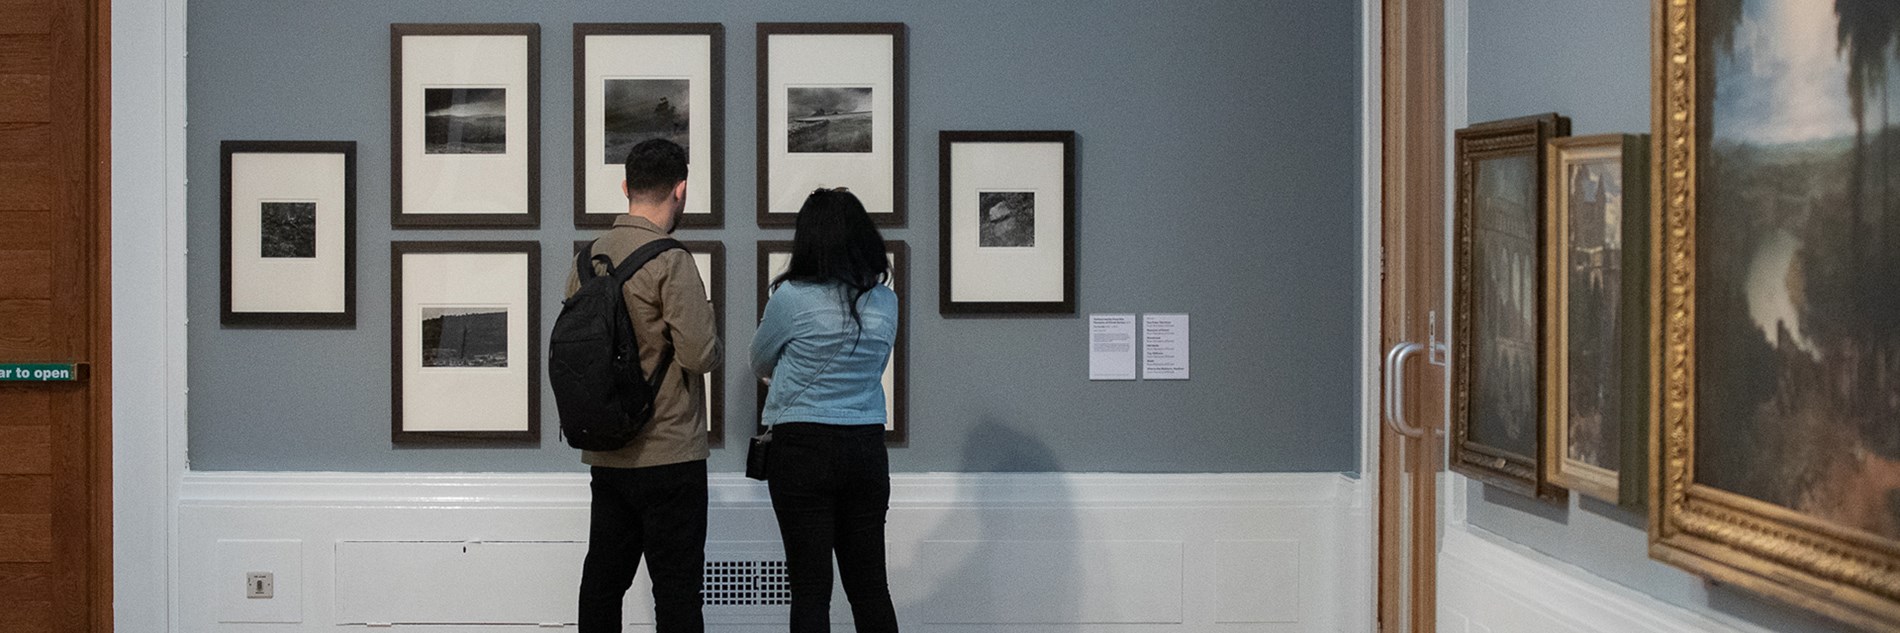 A photograph of two gallery visitors looking at a display of seven black and white framed photographs displayed on a grey wall.